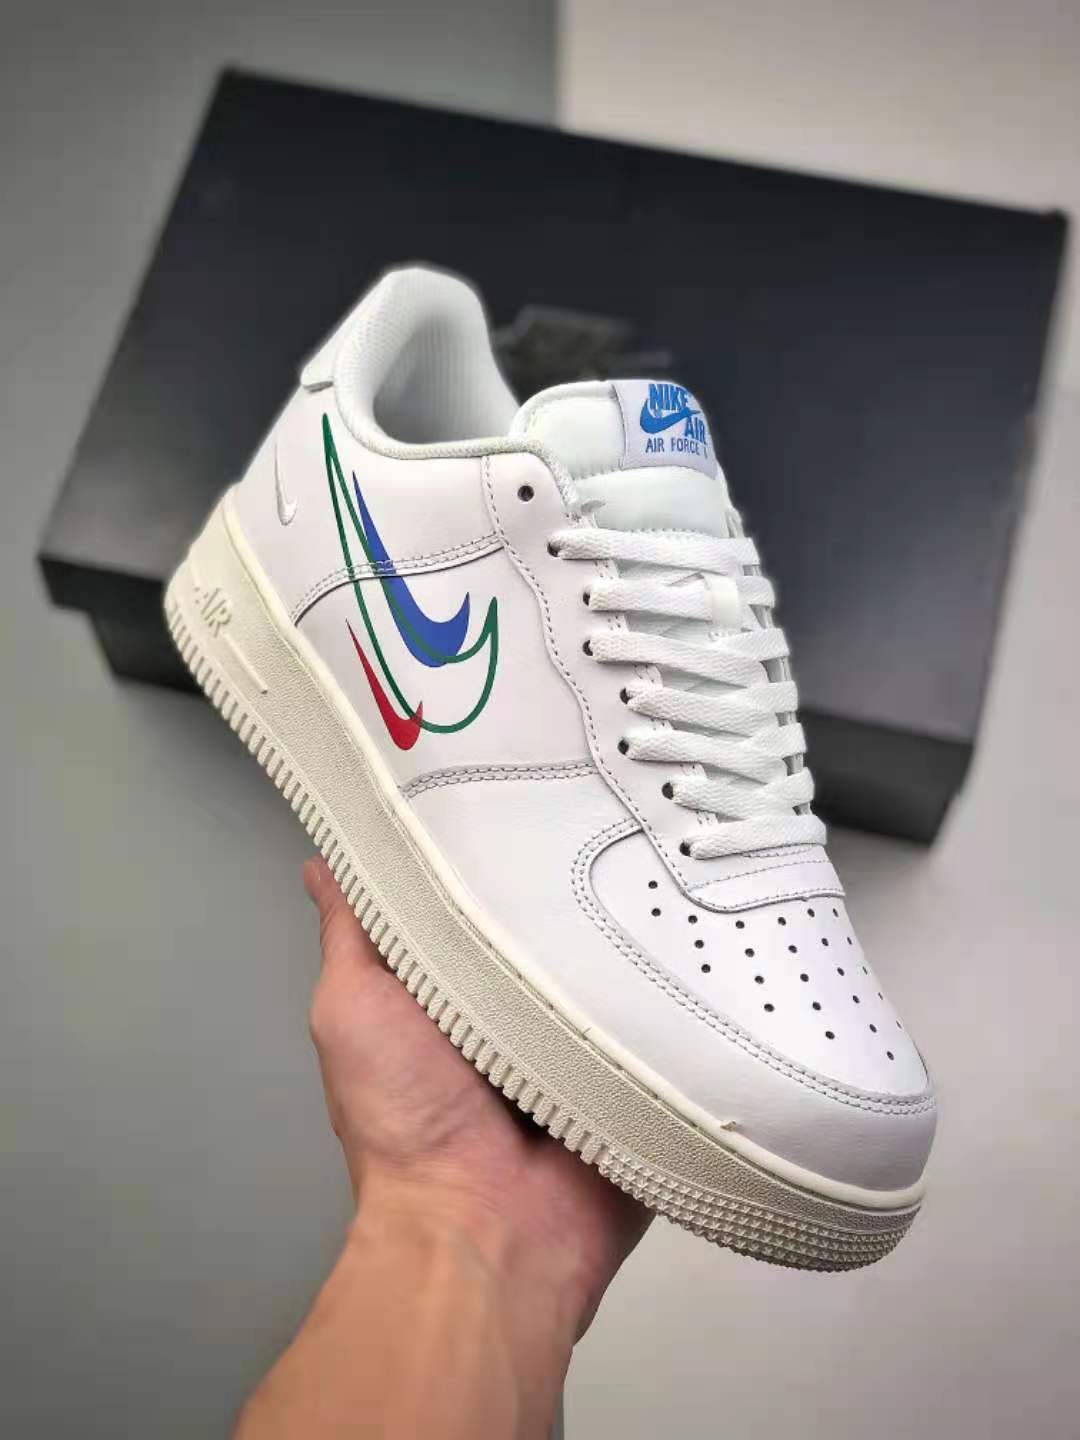 Nike Air Force 1 Low 'Multi-Swoosh' DM9096-101: Iconic Sneakers with Striking Design